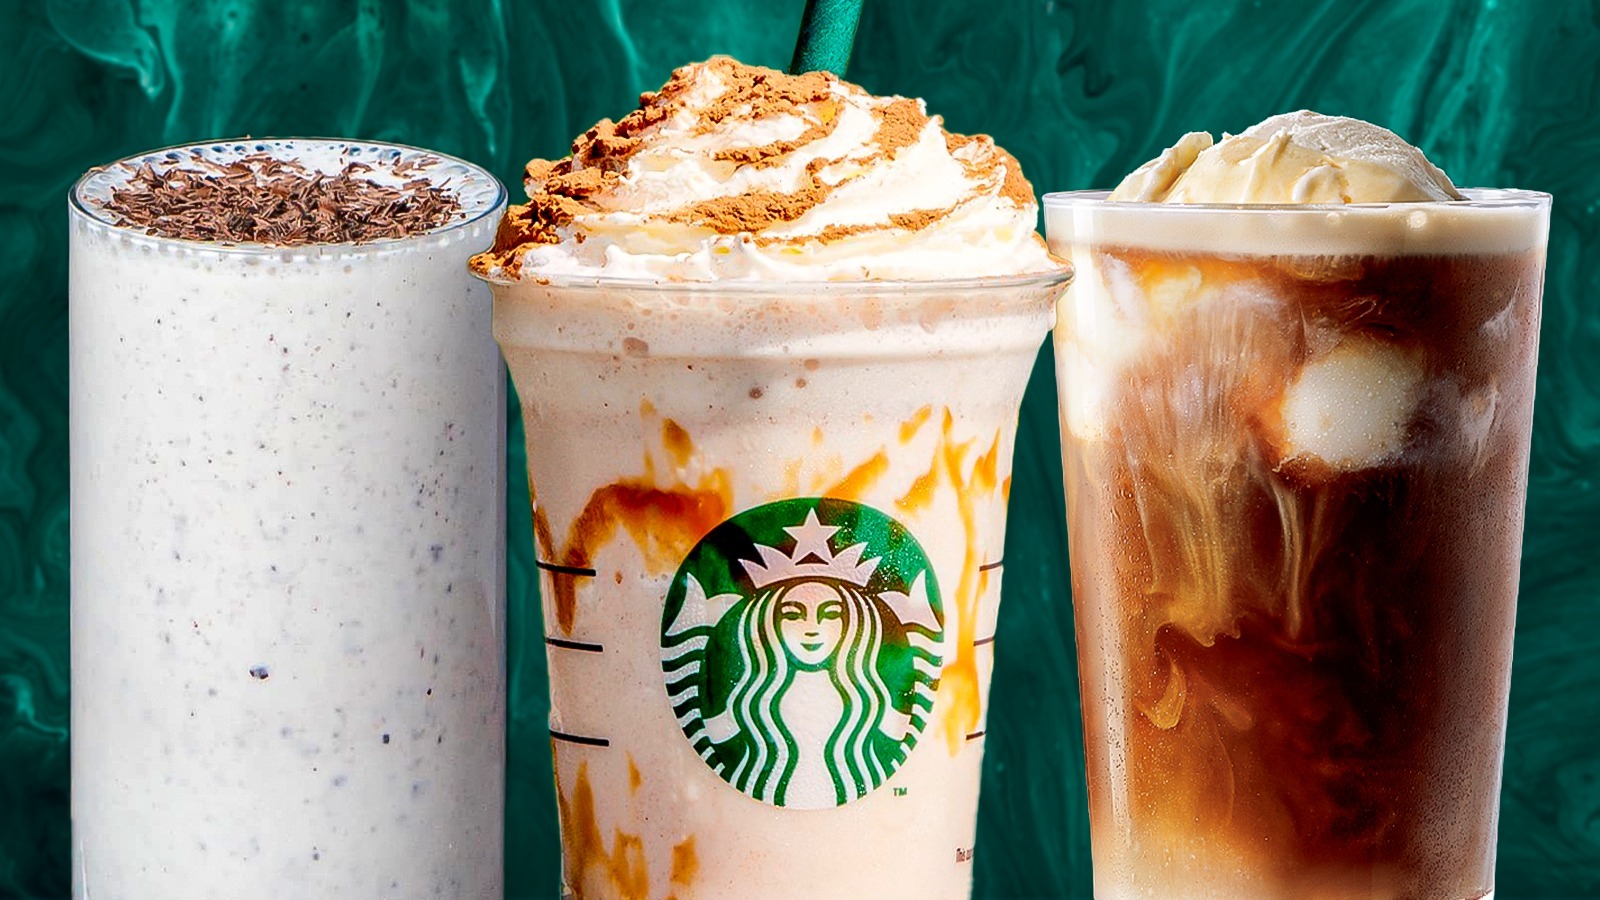 Here's How Much a Tall Starbucks Latte Costs in Other Countries